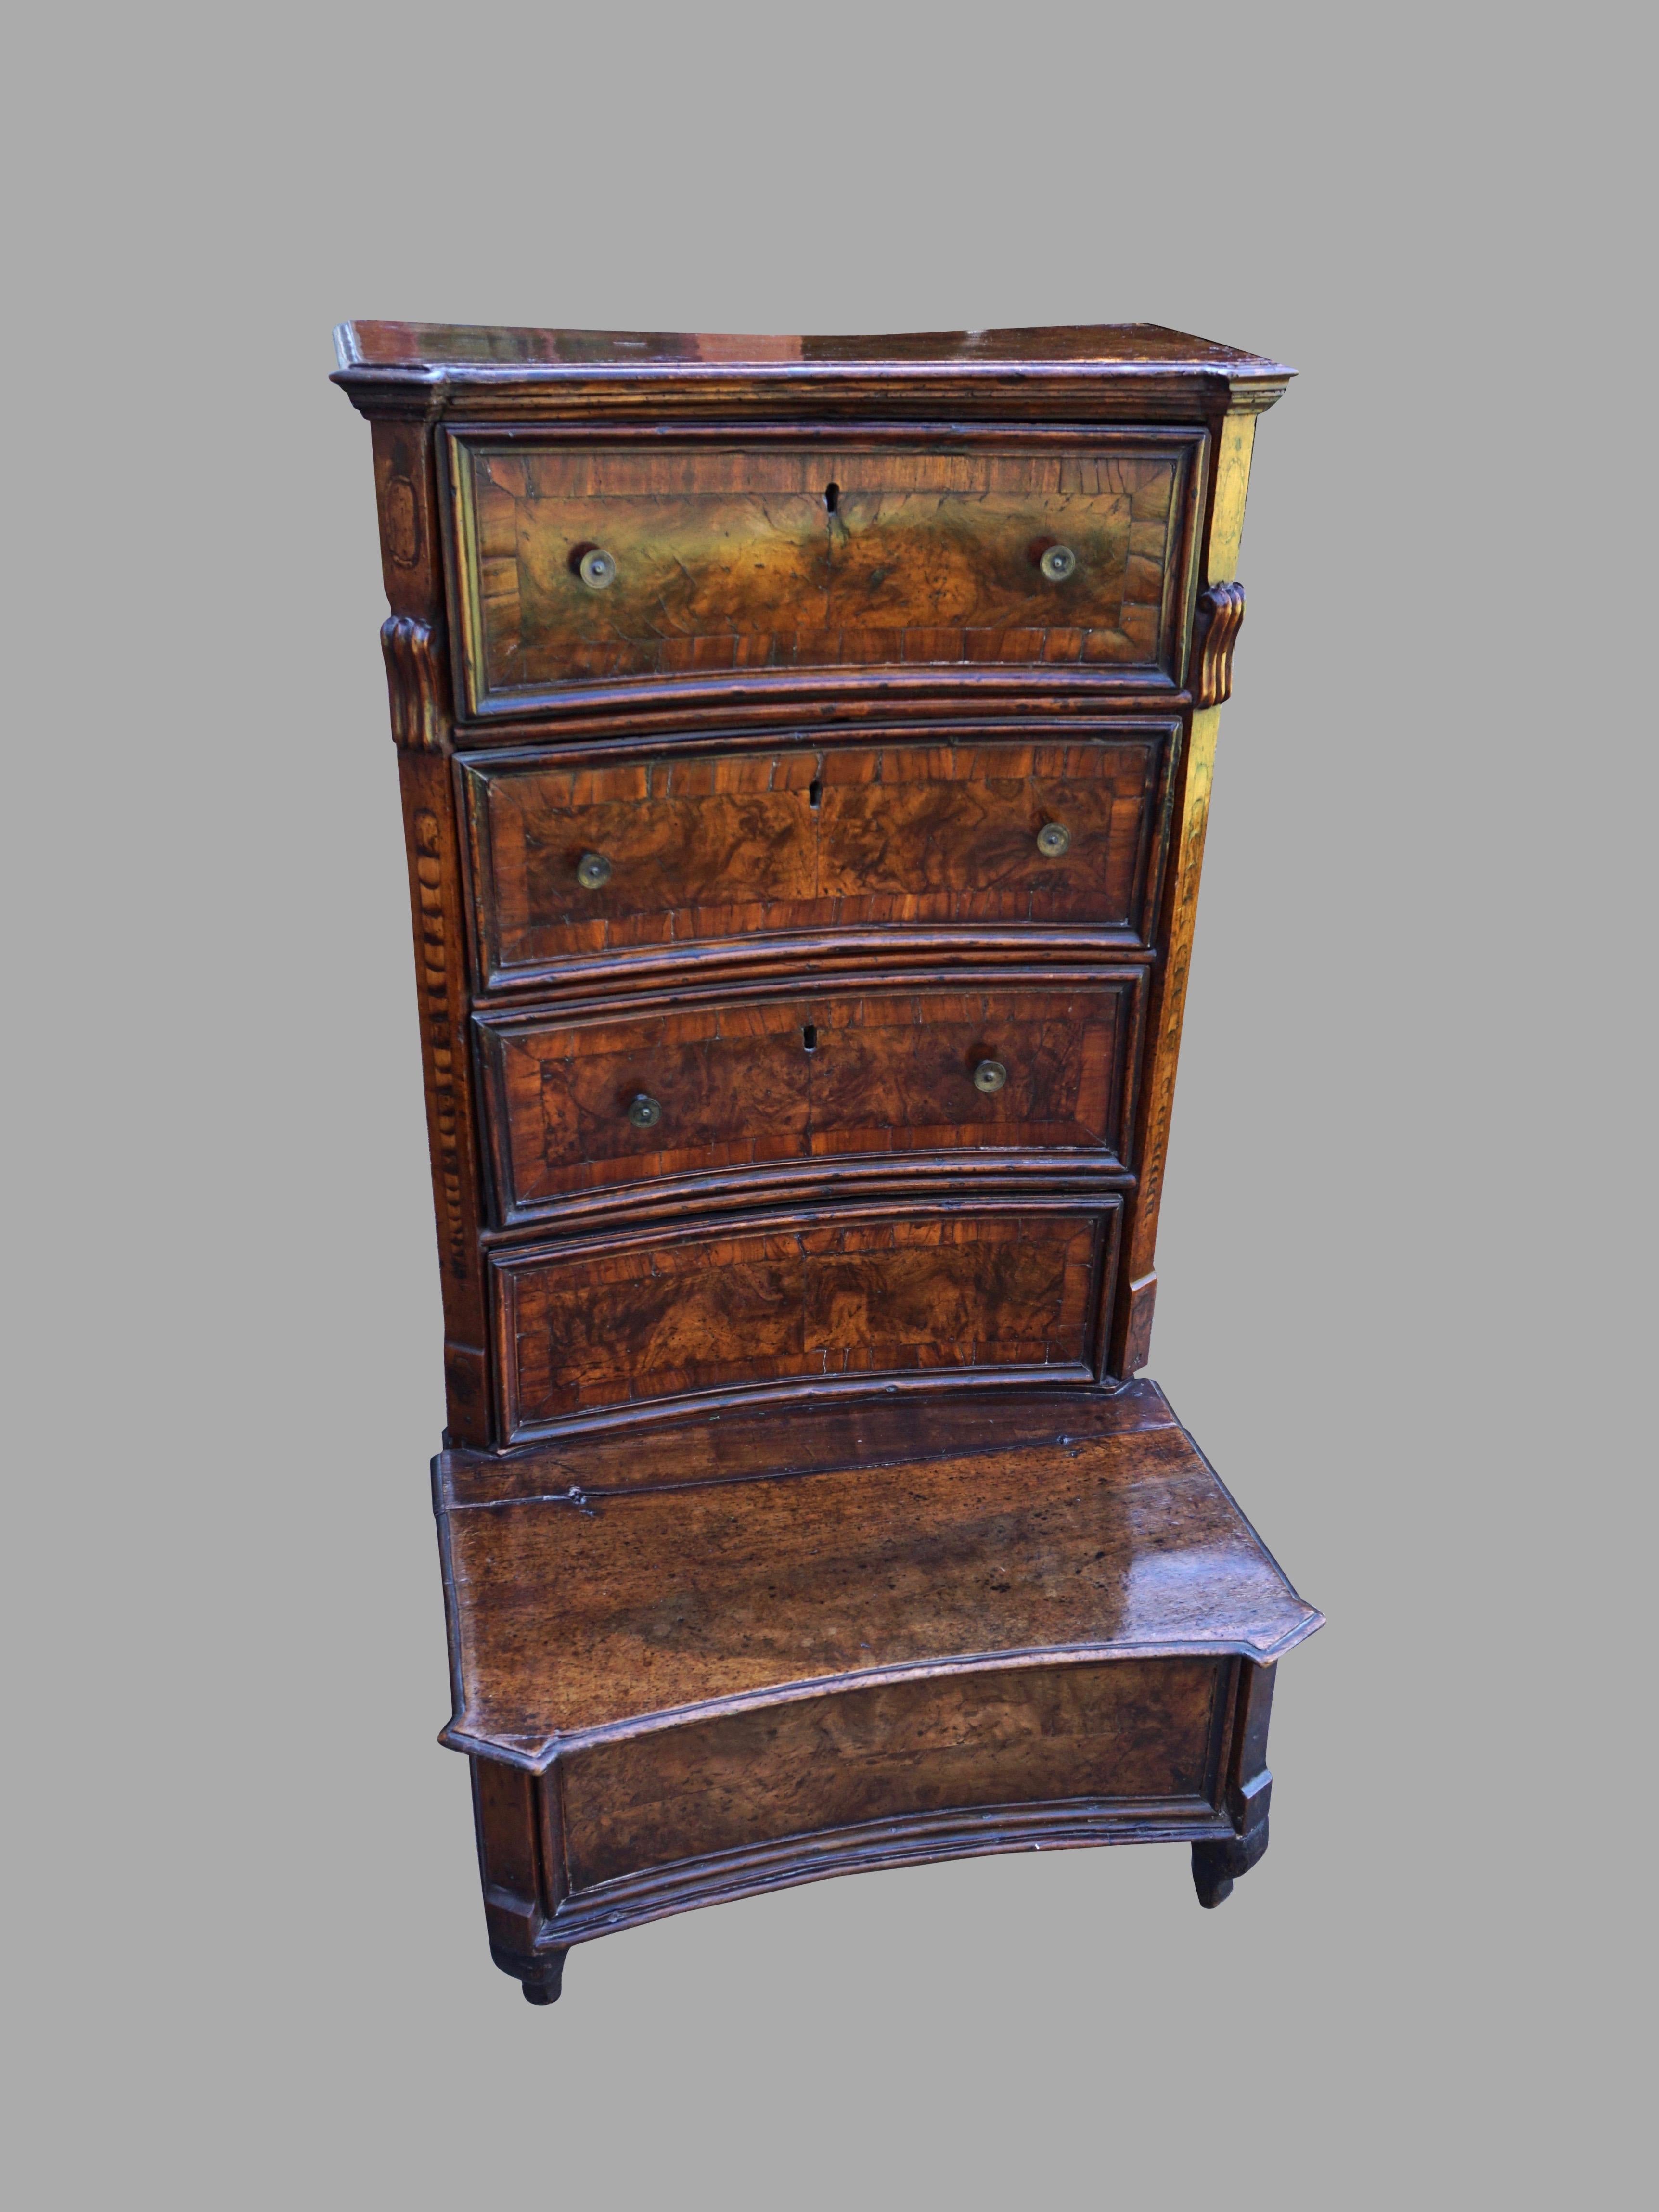 A fine quality Italian 17th century inlaid and burled walnut prie-dieu with a lovely warm color, the concave form upper stage with inlaid quarter columns topped by scrolls framing 3 functional cross-banded drawers and one additional dummy drawer,